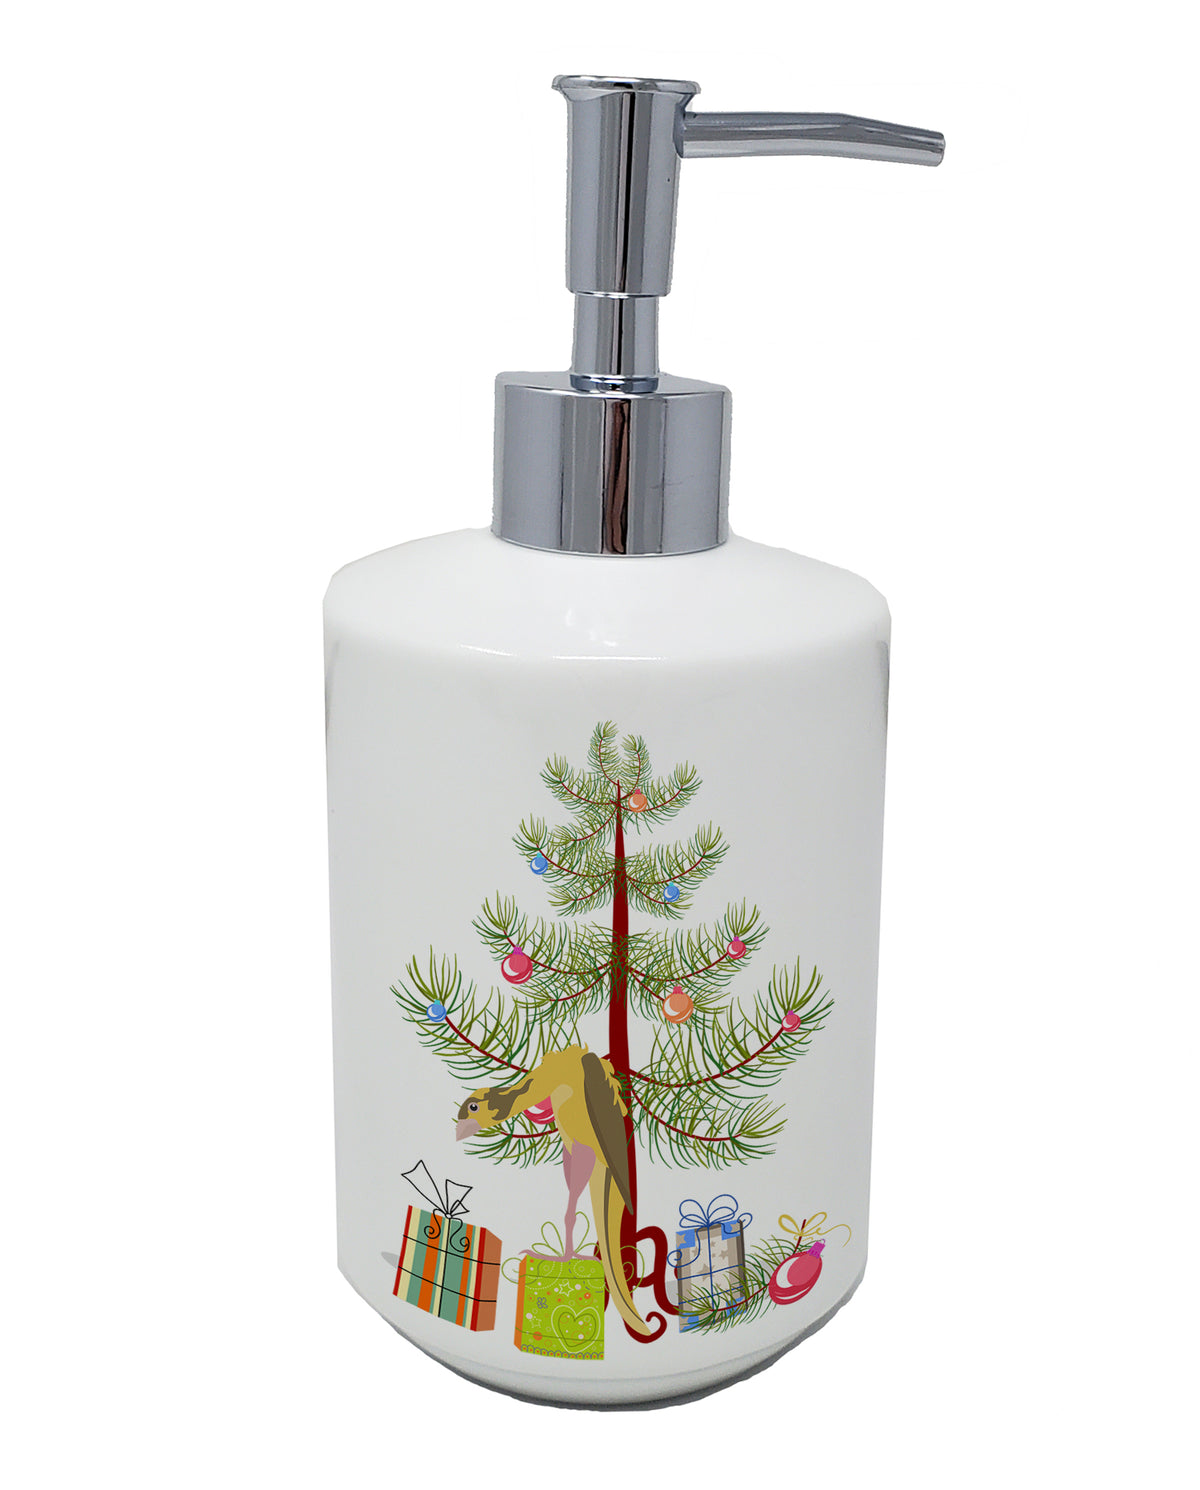 Buy this Jibso Canary Merry Christmas Ceramic Soap Dispenser